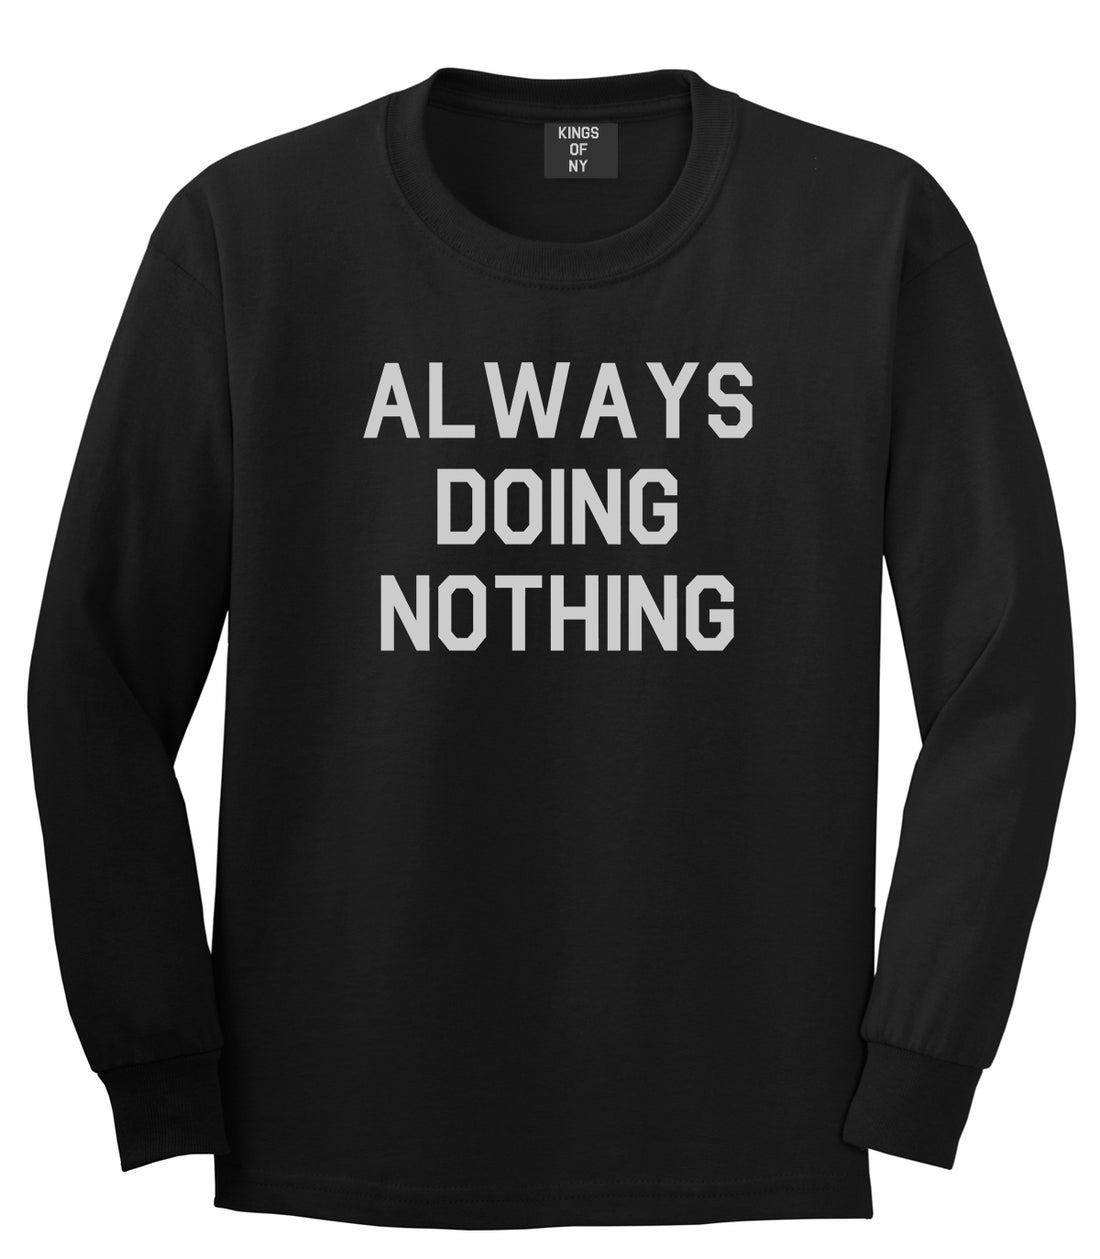 Always Doing Nothing Mens Black Long Sleeve T-Shirt by Kings Of NY